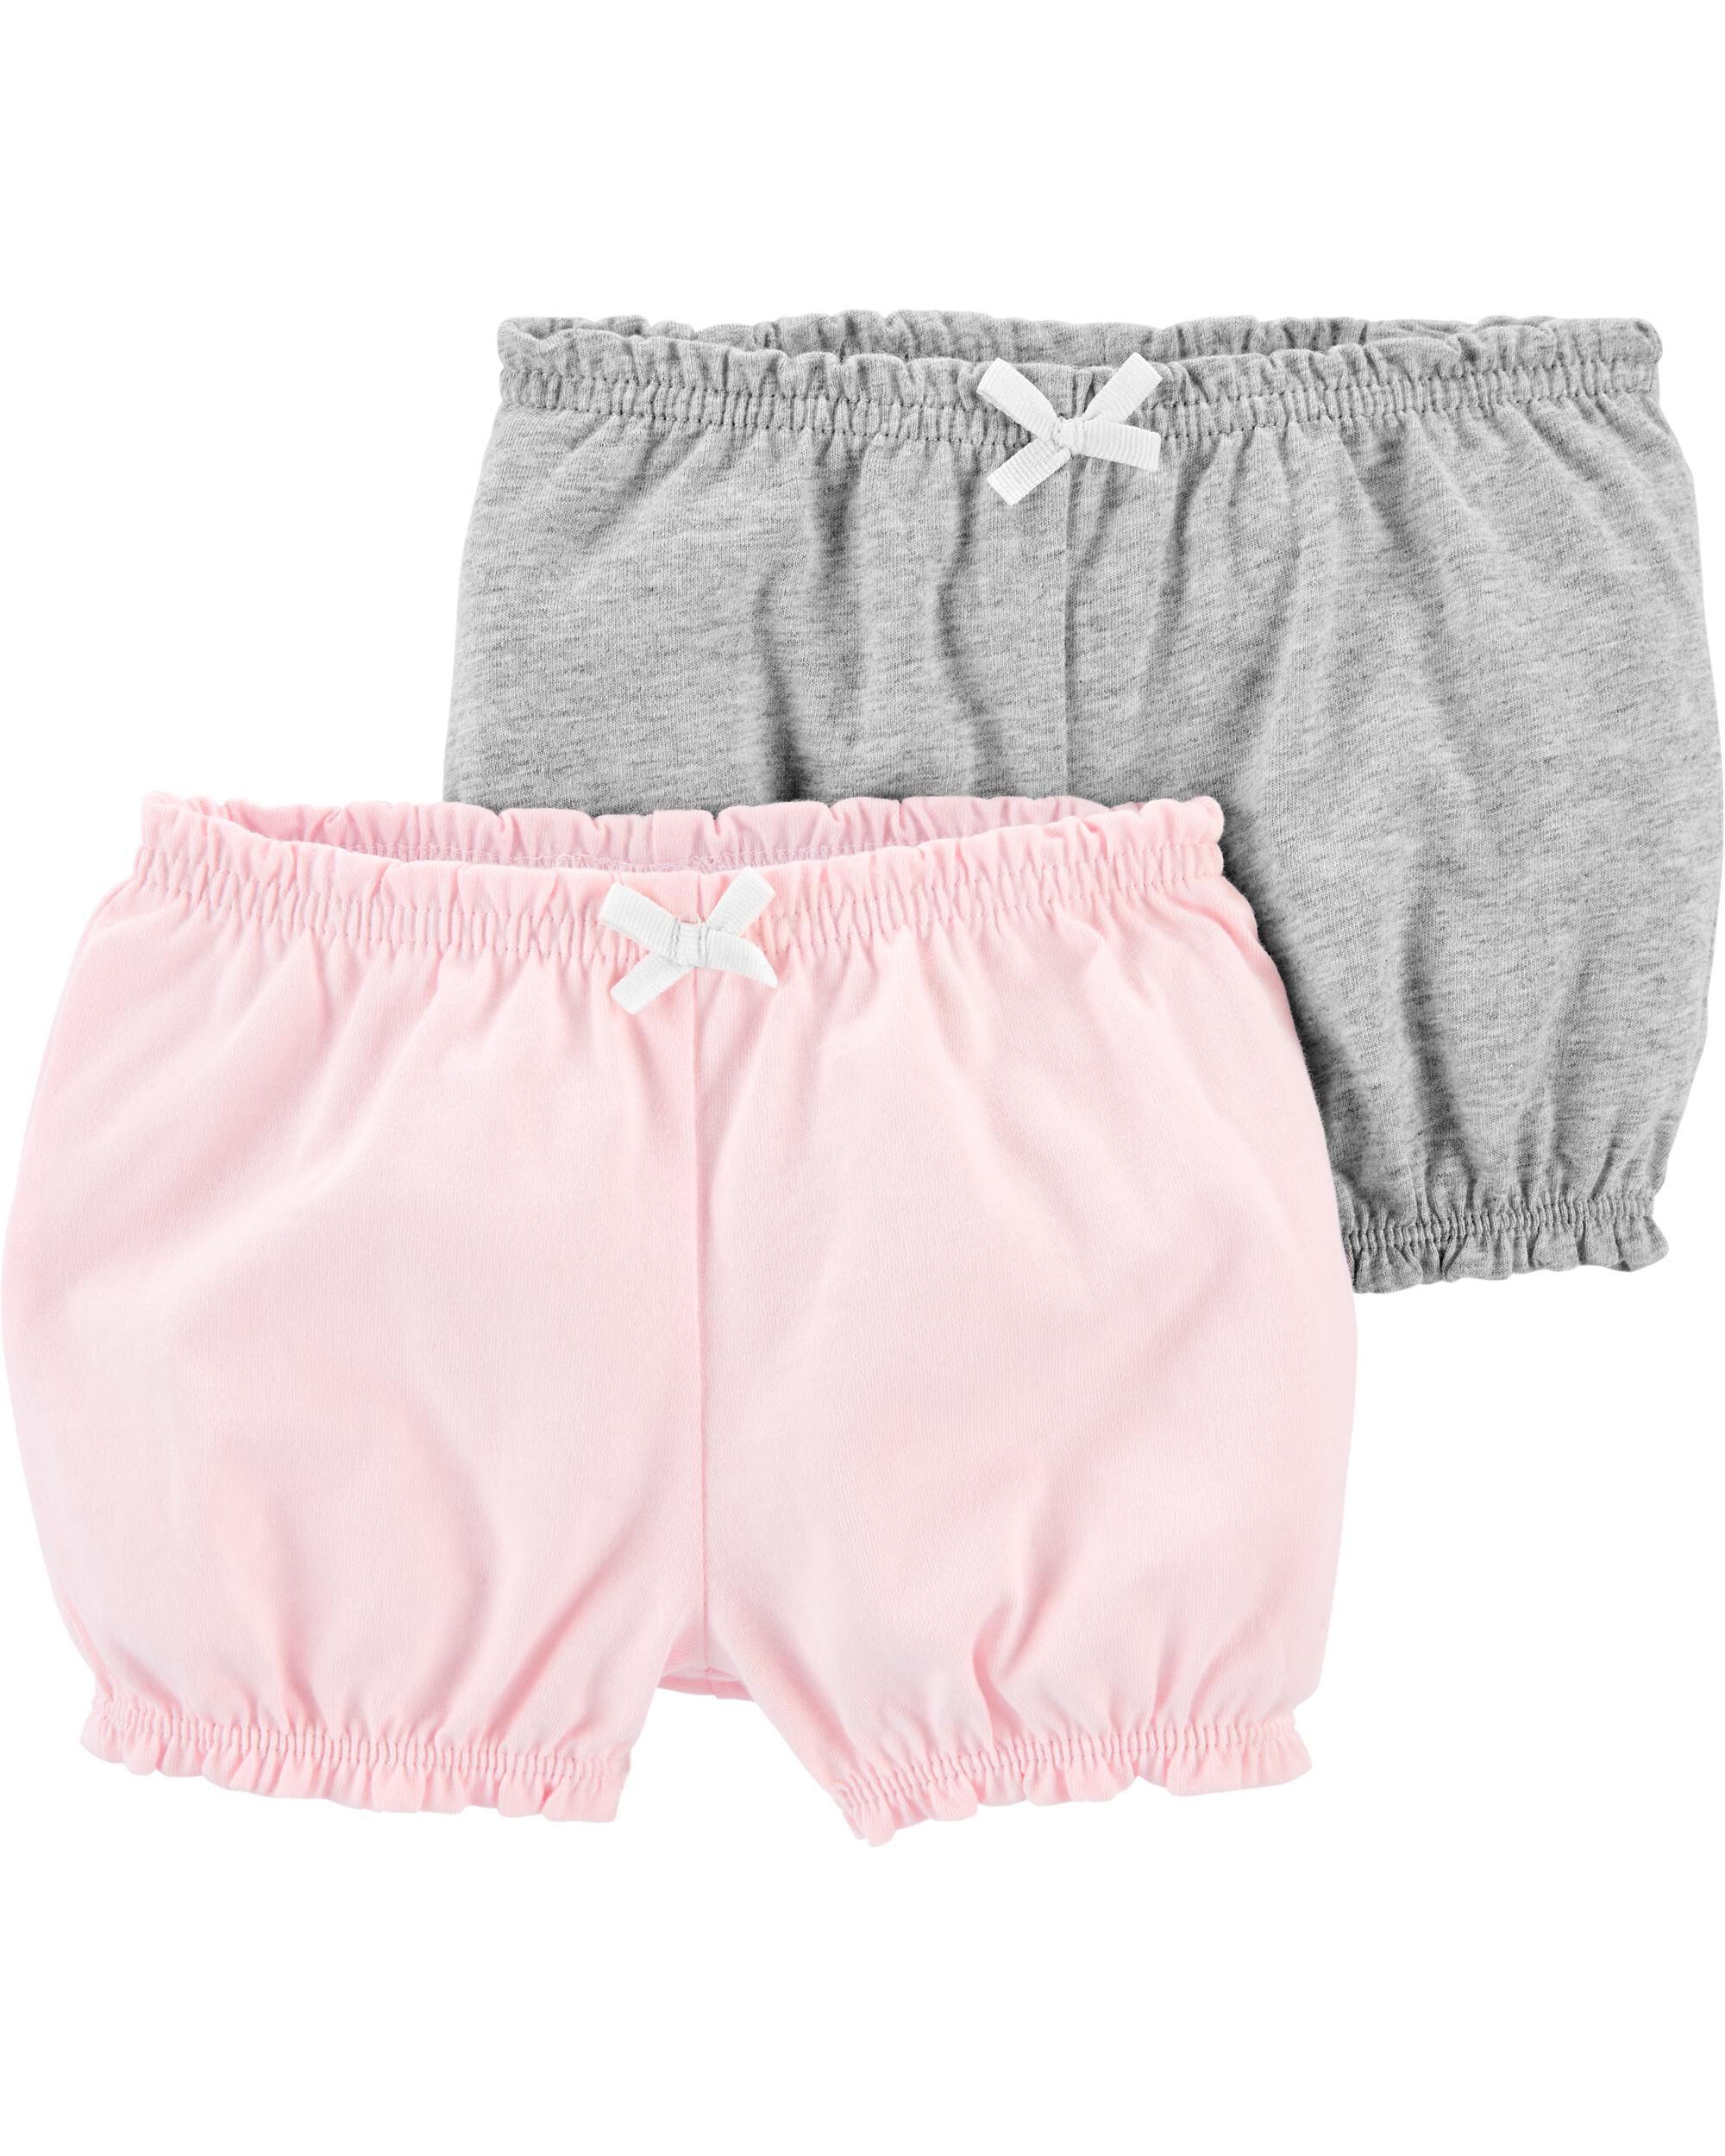 Carters Baby 2-Pack Bubble Shorts